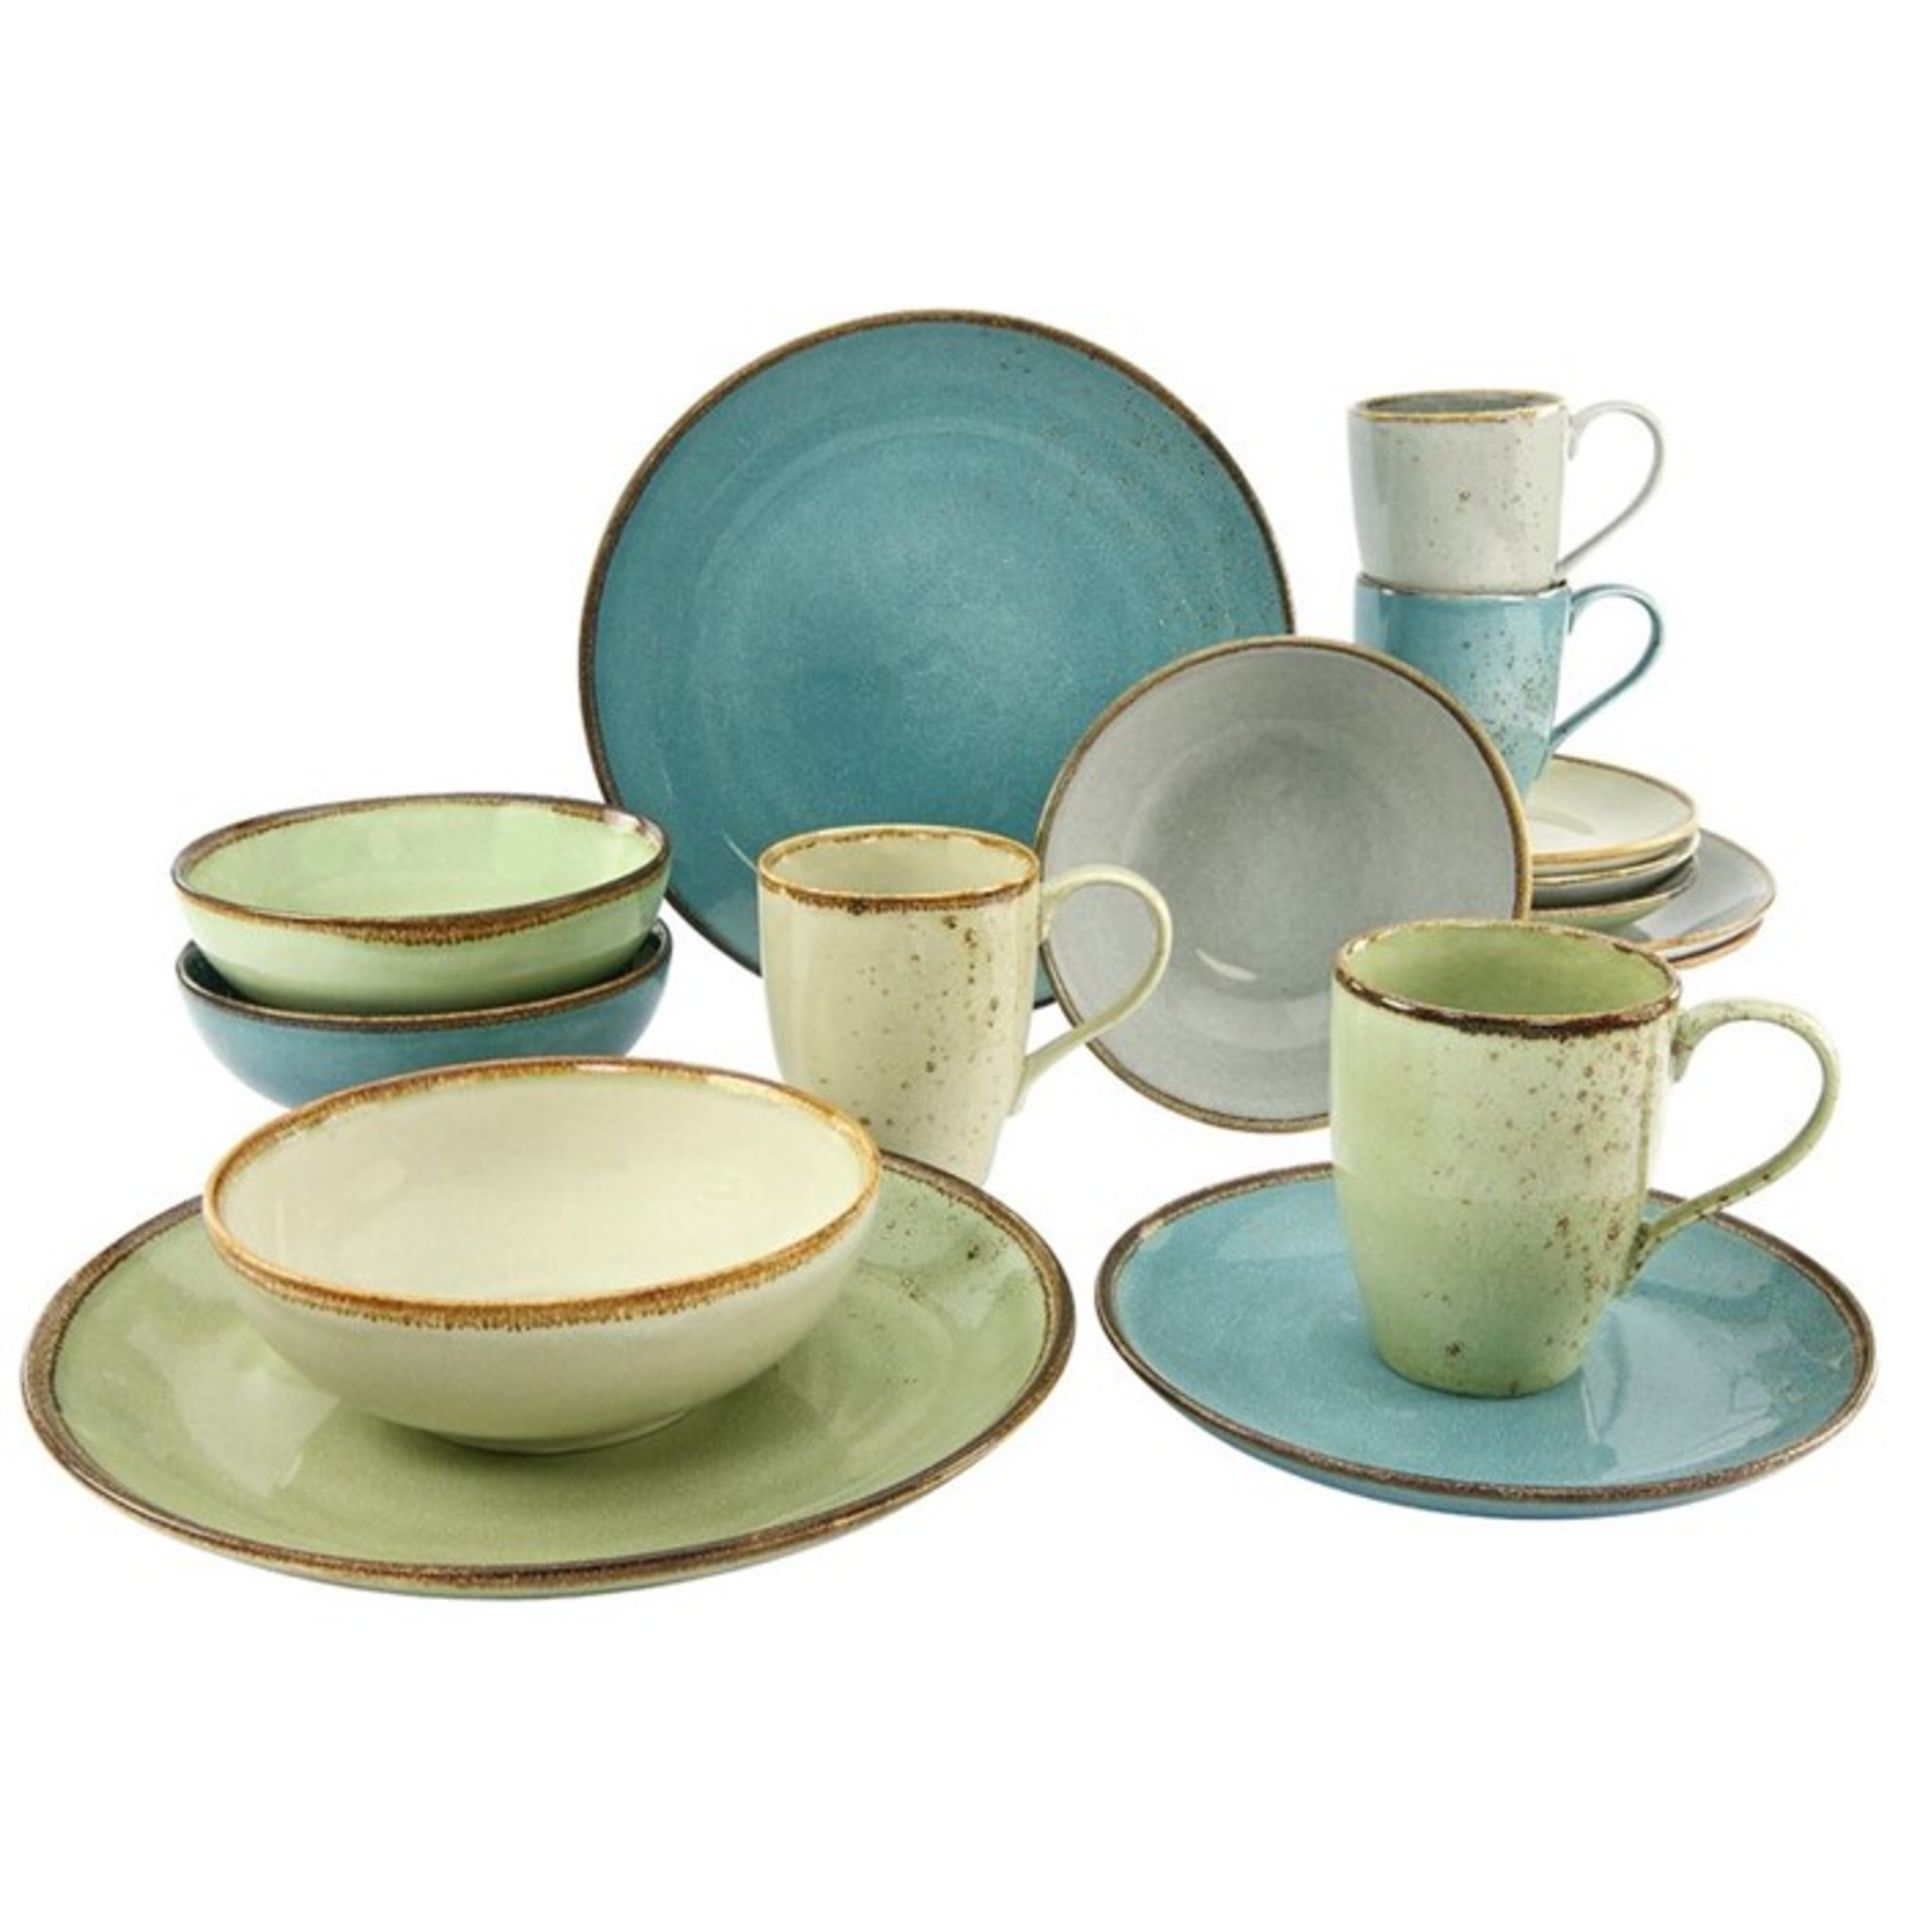 Brambly Cottage,Corley 16 Piece Dinnerware Set, Service for 4 RRP £73.99 (CZY1708 - 17664/18) 2G